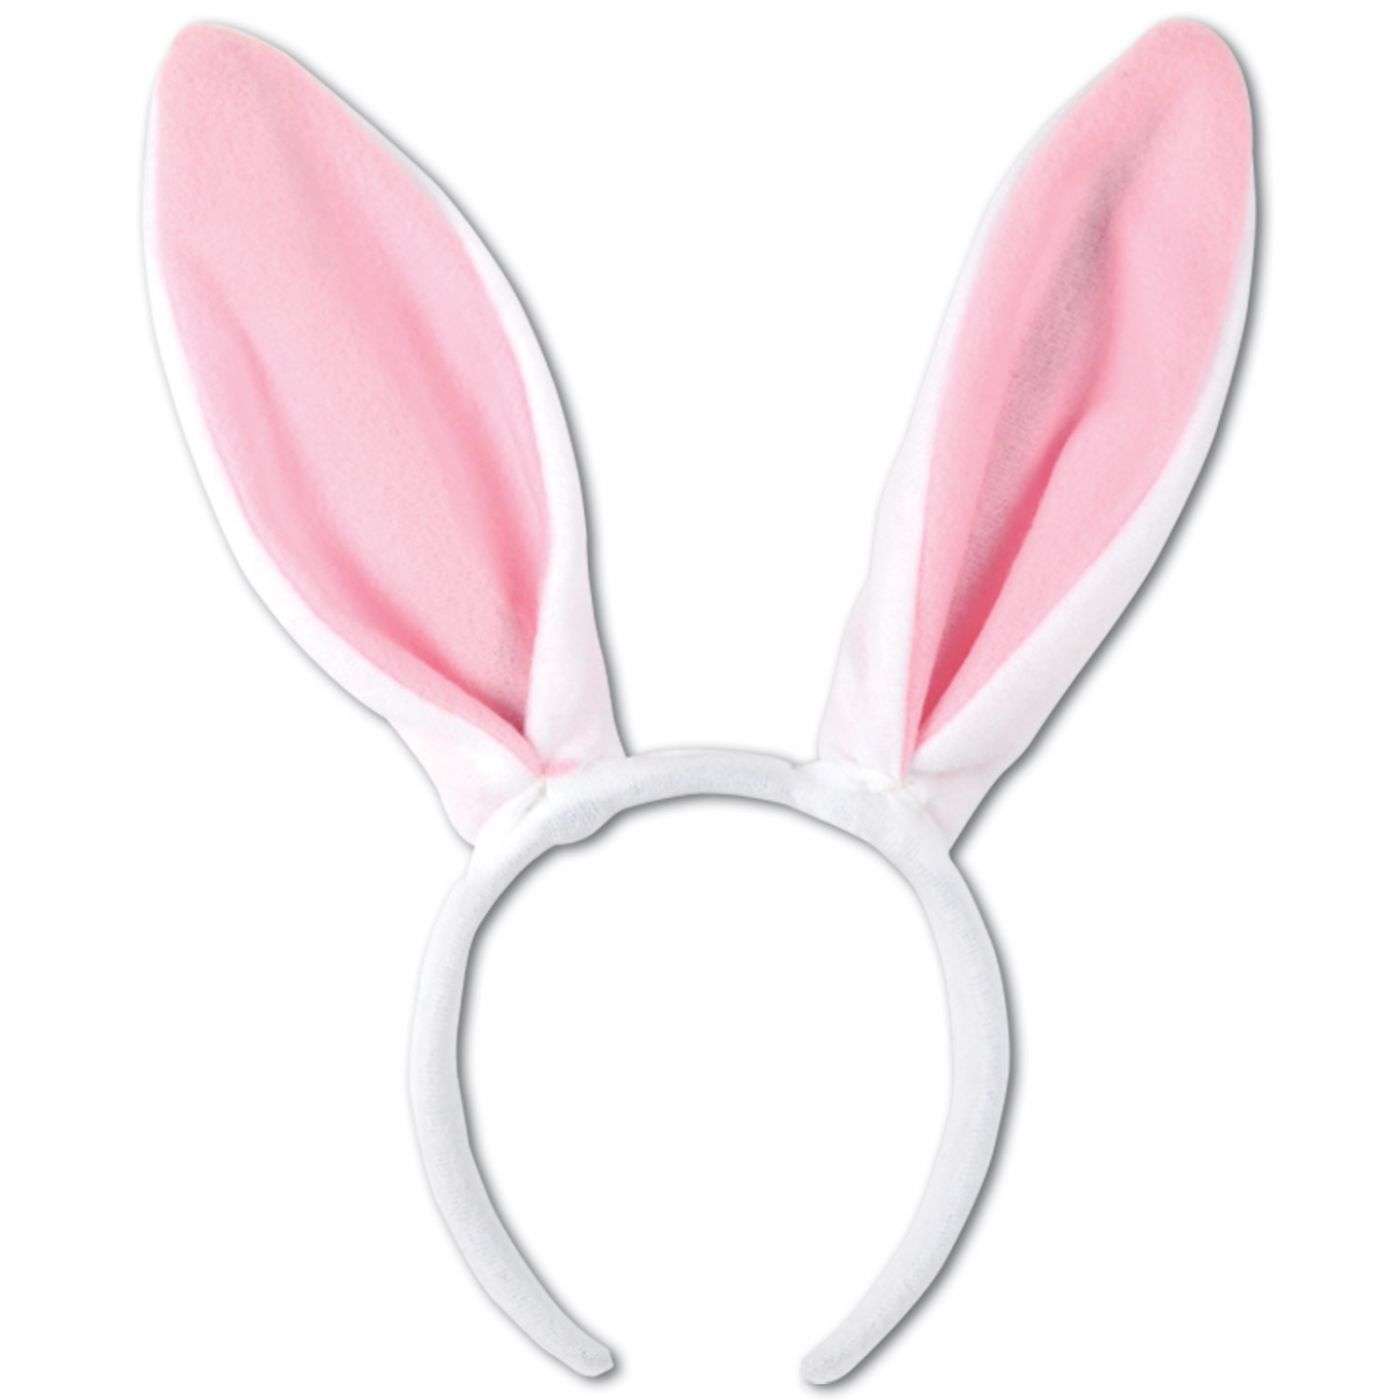 Soft-Touch Bunny Ears image